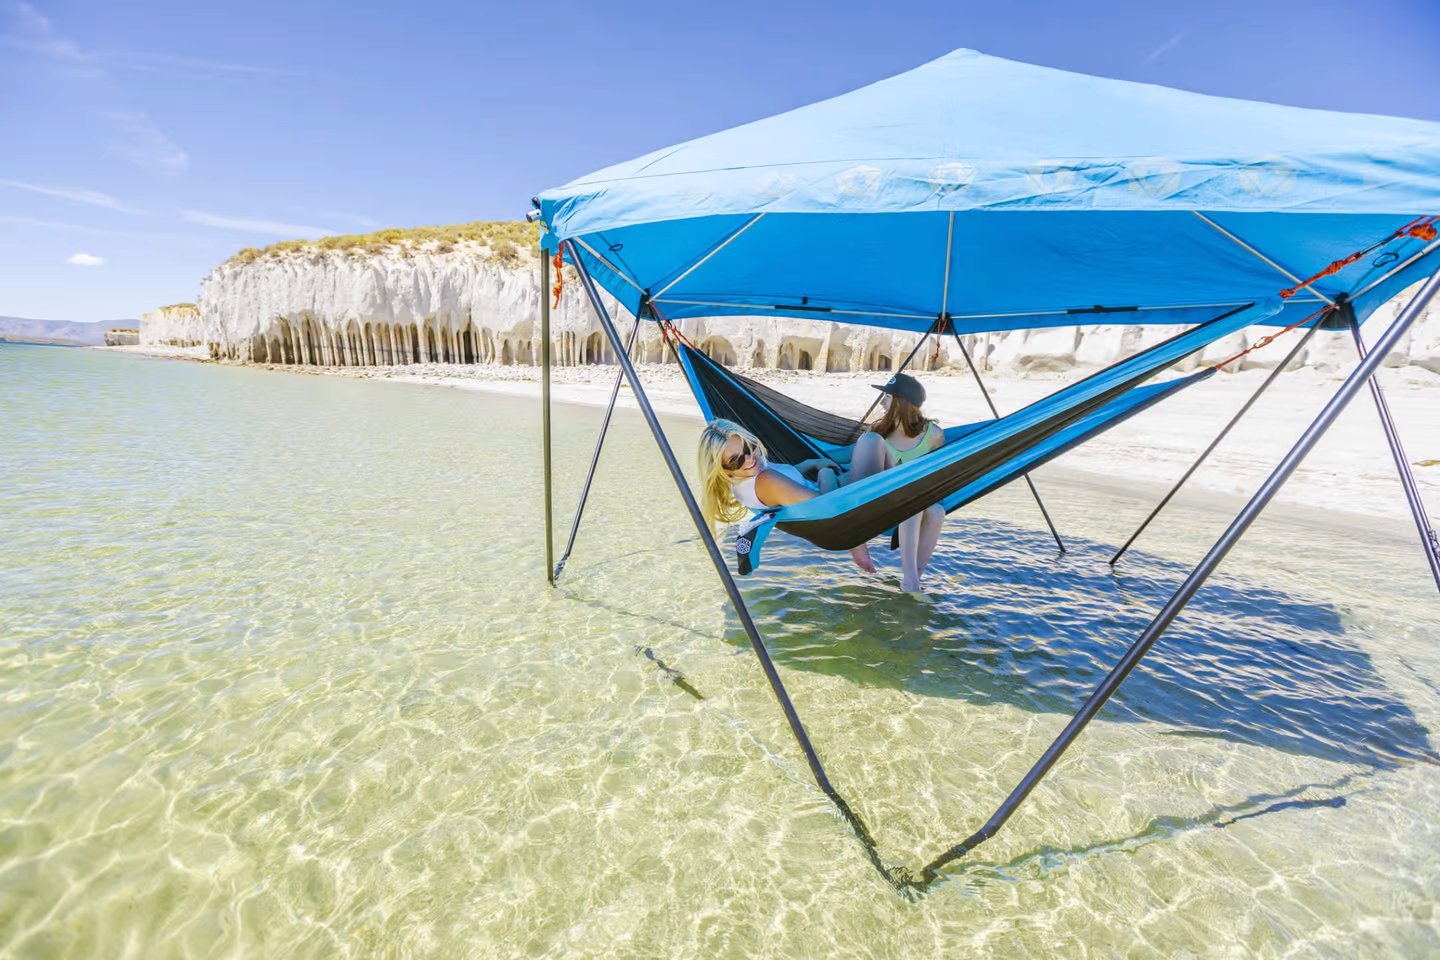 iDome Multi-Hammock let’s you lounge without Trees